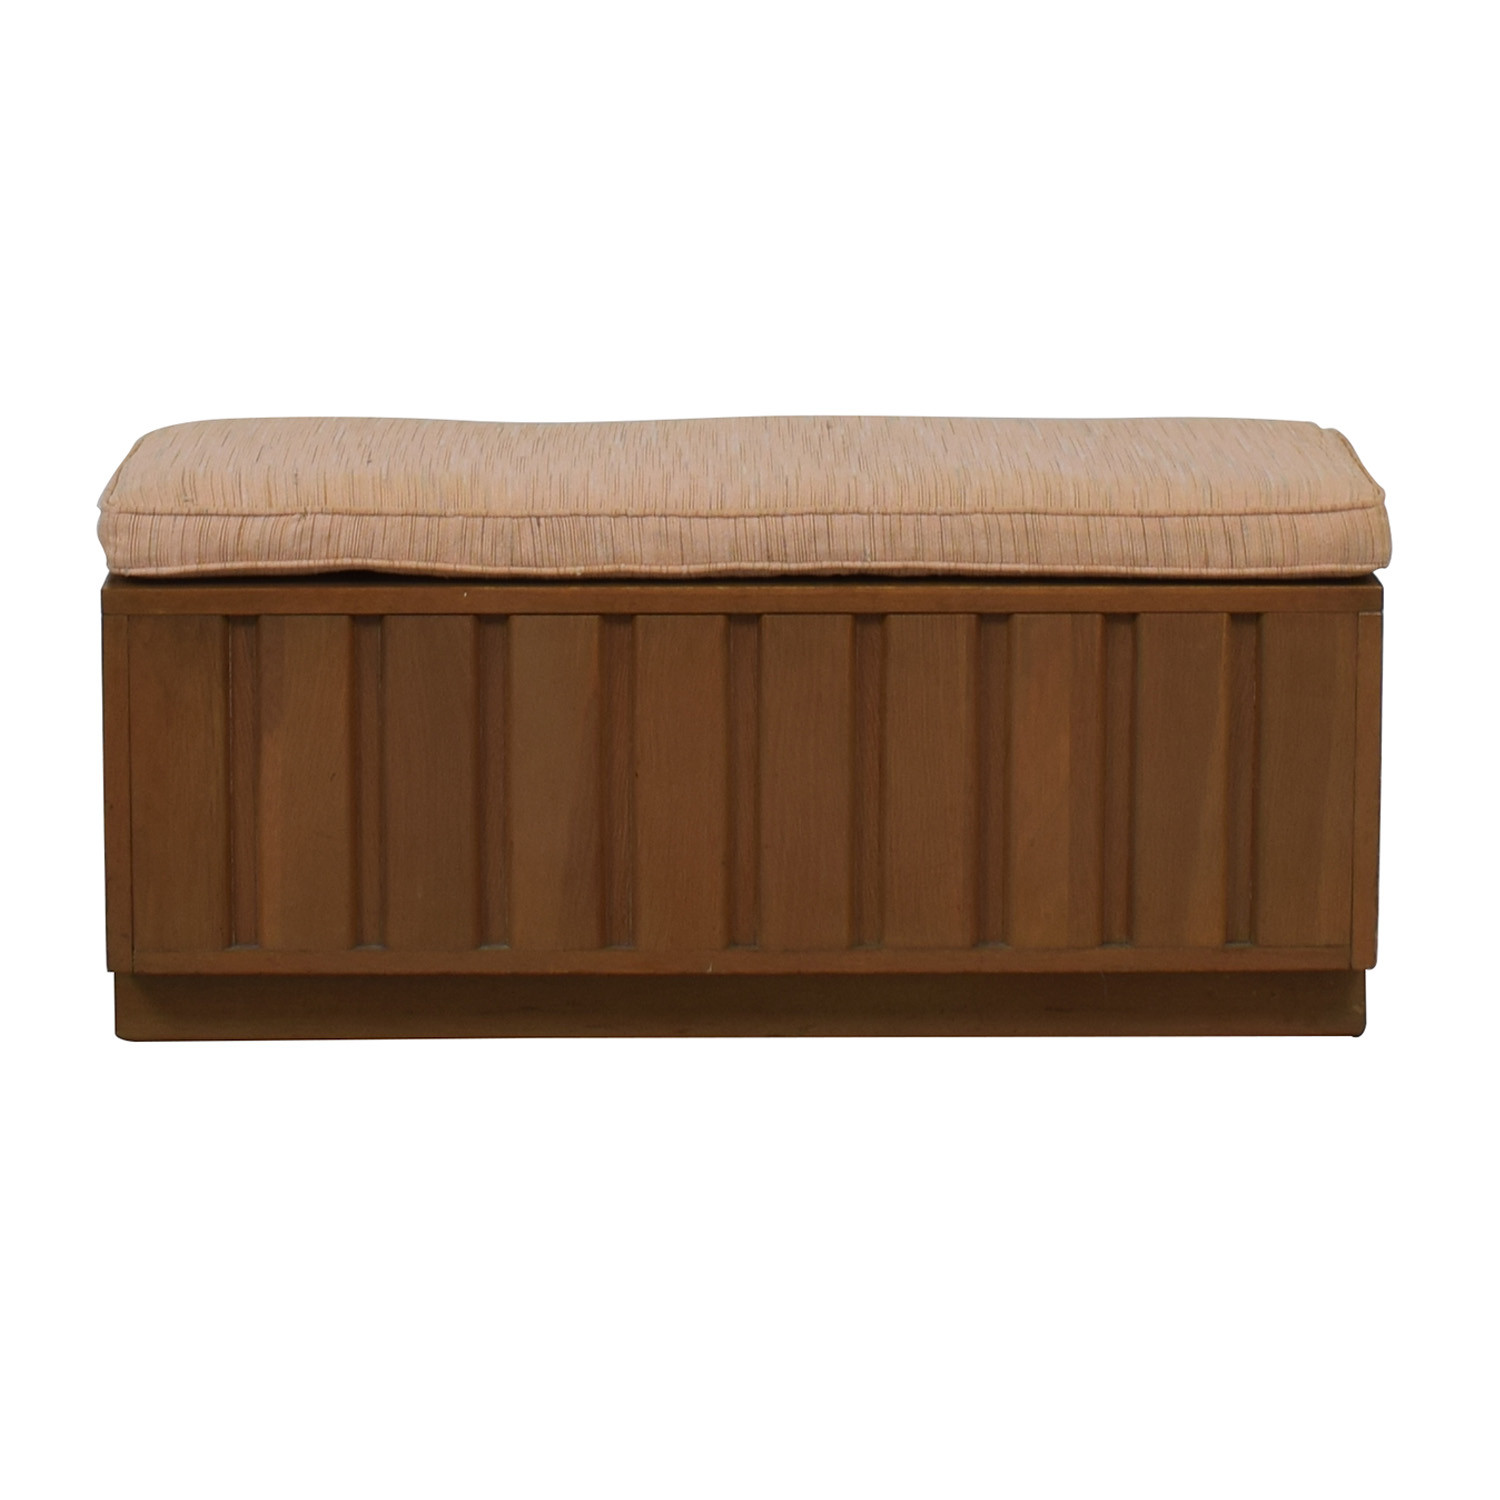 Used Storage Bench
 OFF Wood Storage Bench with Beige Cushion Chairs